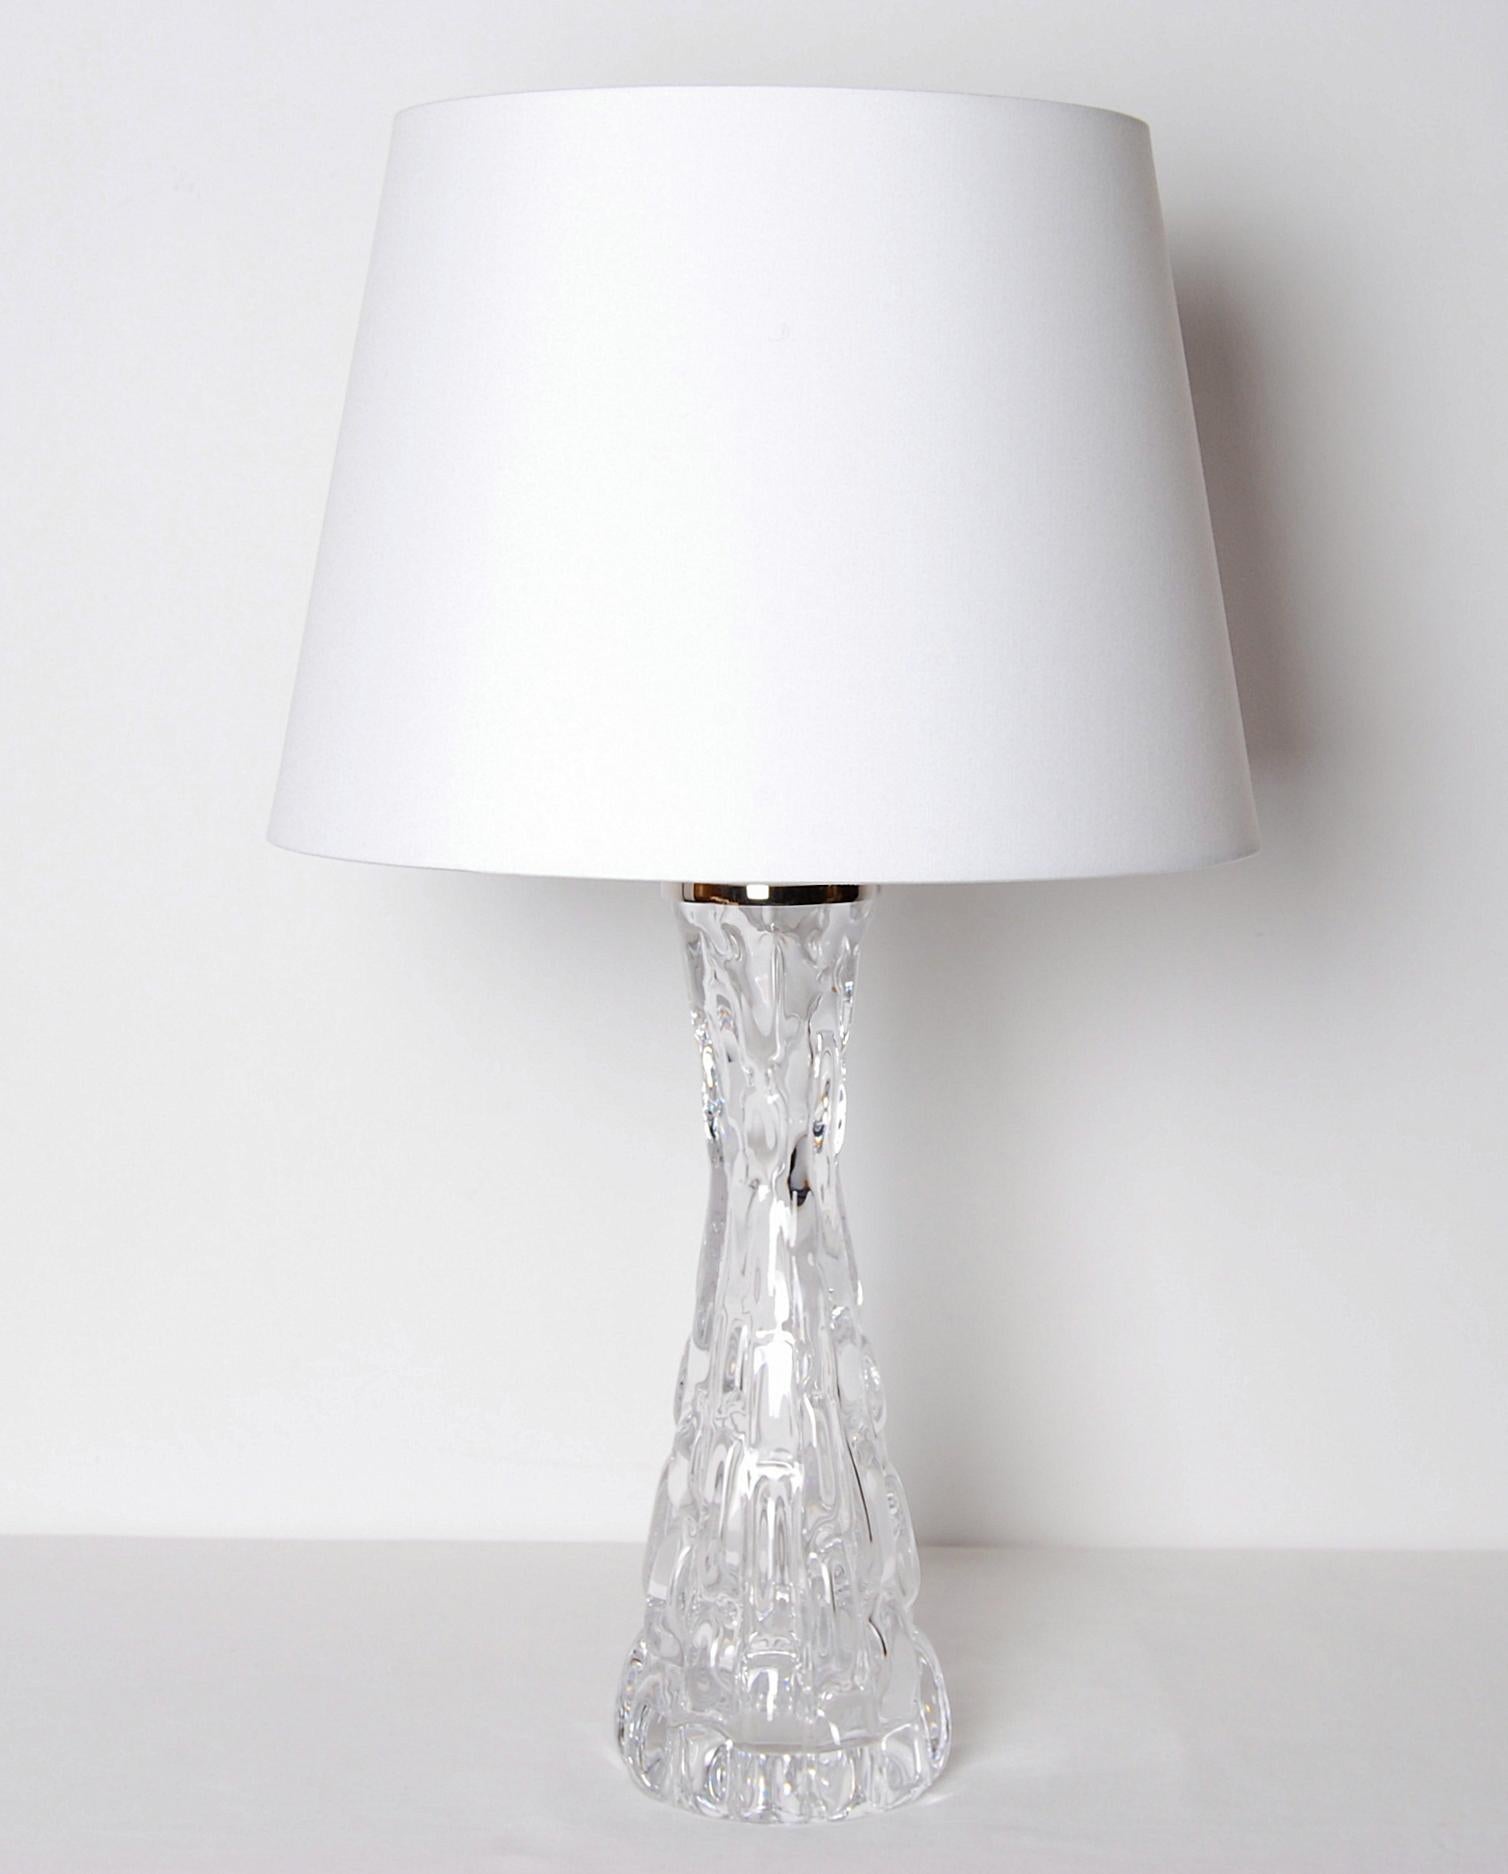 The smaller version of model RD 1477 table lamp in crystal glass by Carl Fagerlund for Orrefors, Sweden. The heavy hour glass form base is made of crystal glass. Polished nickel plated fittings.
Signed in bottom. Please note: We are selling this